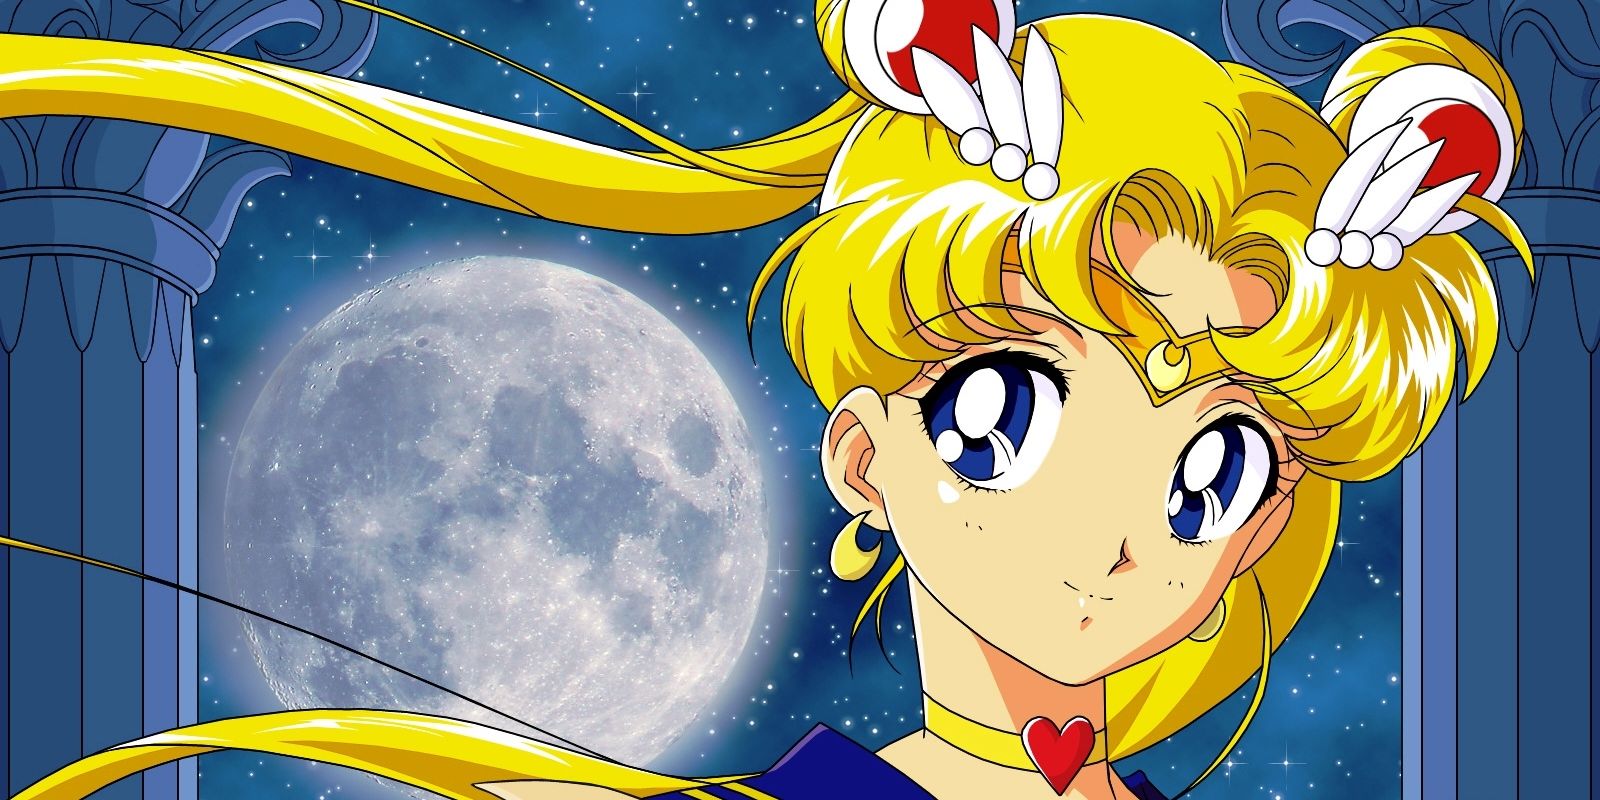 Why do Sailor Moon Fans Love the Old DiC Dub?